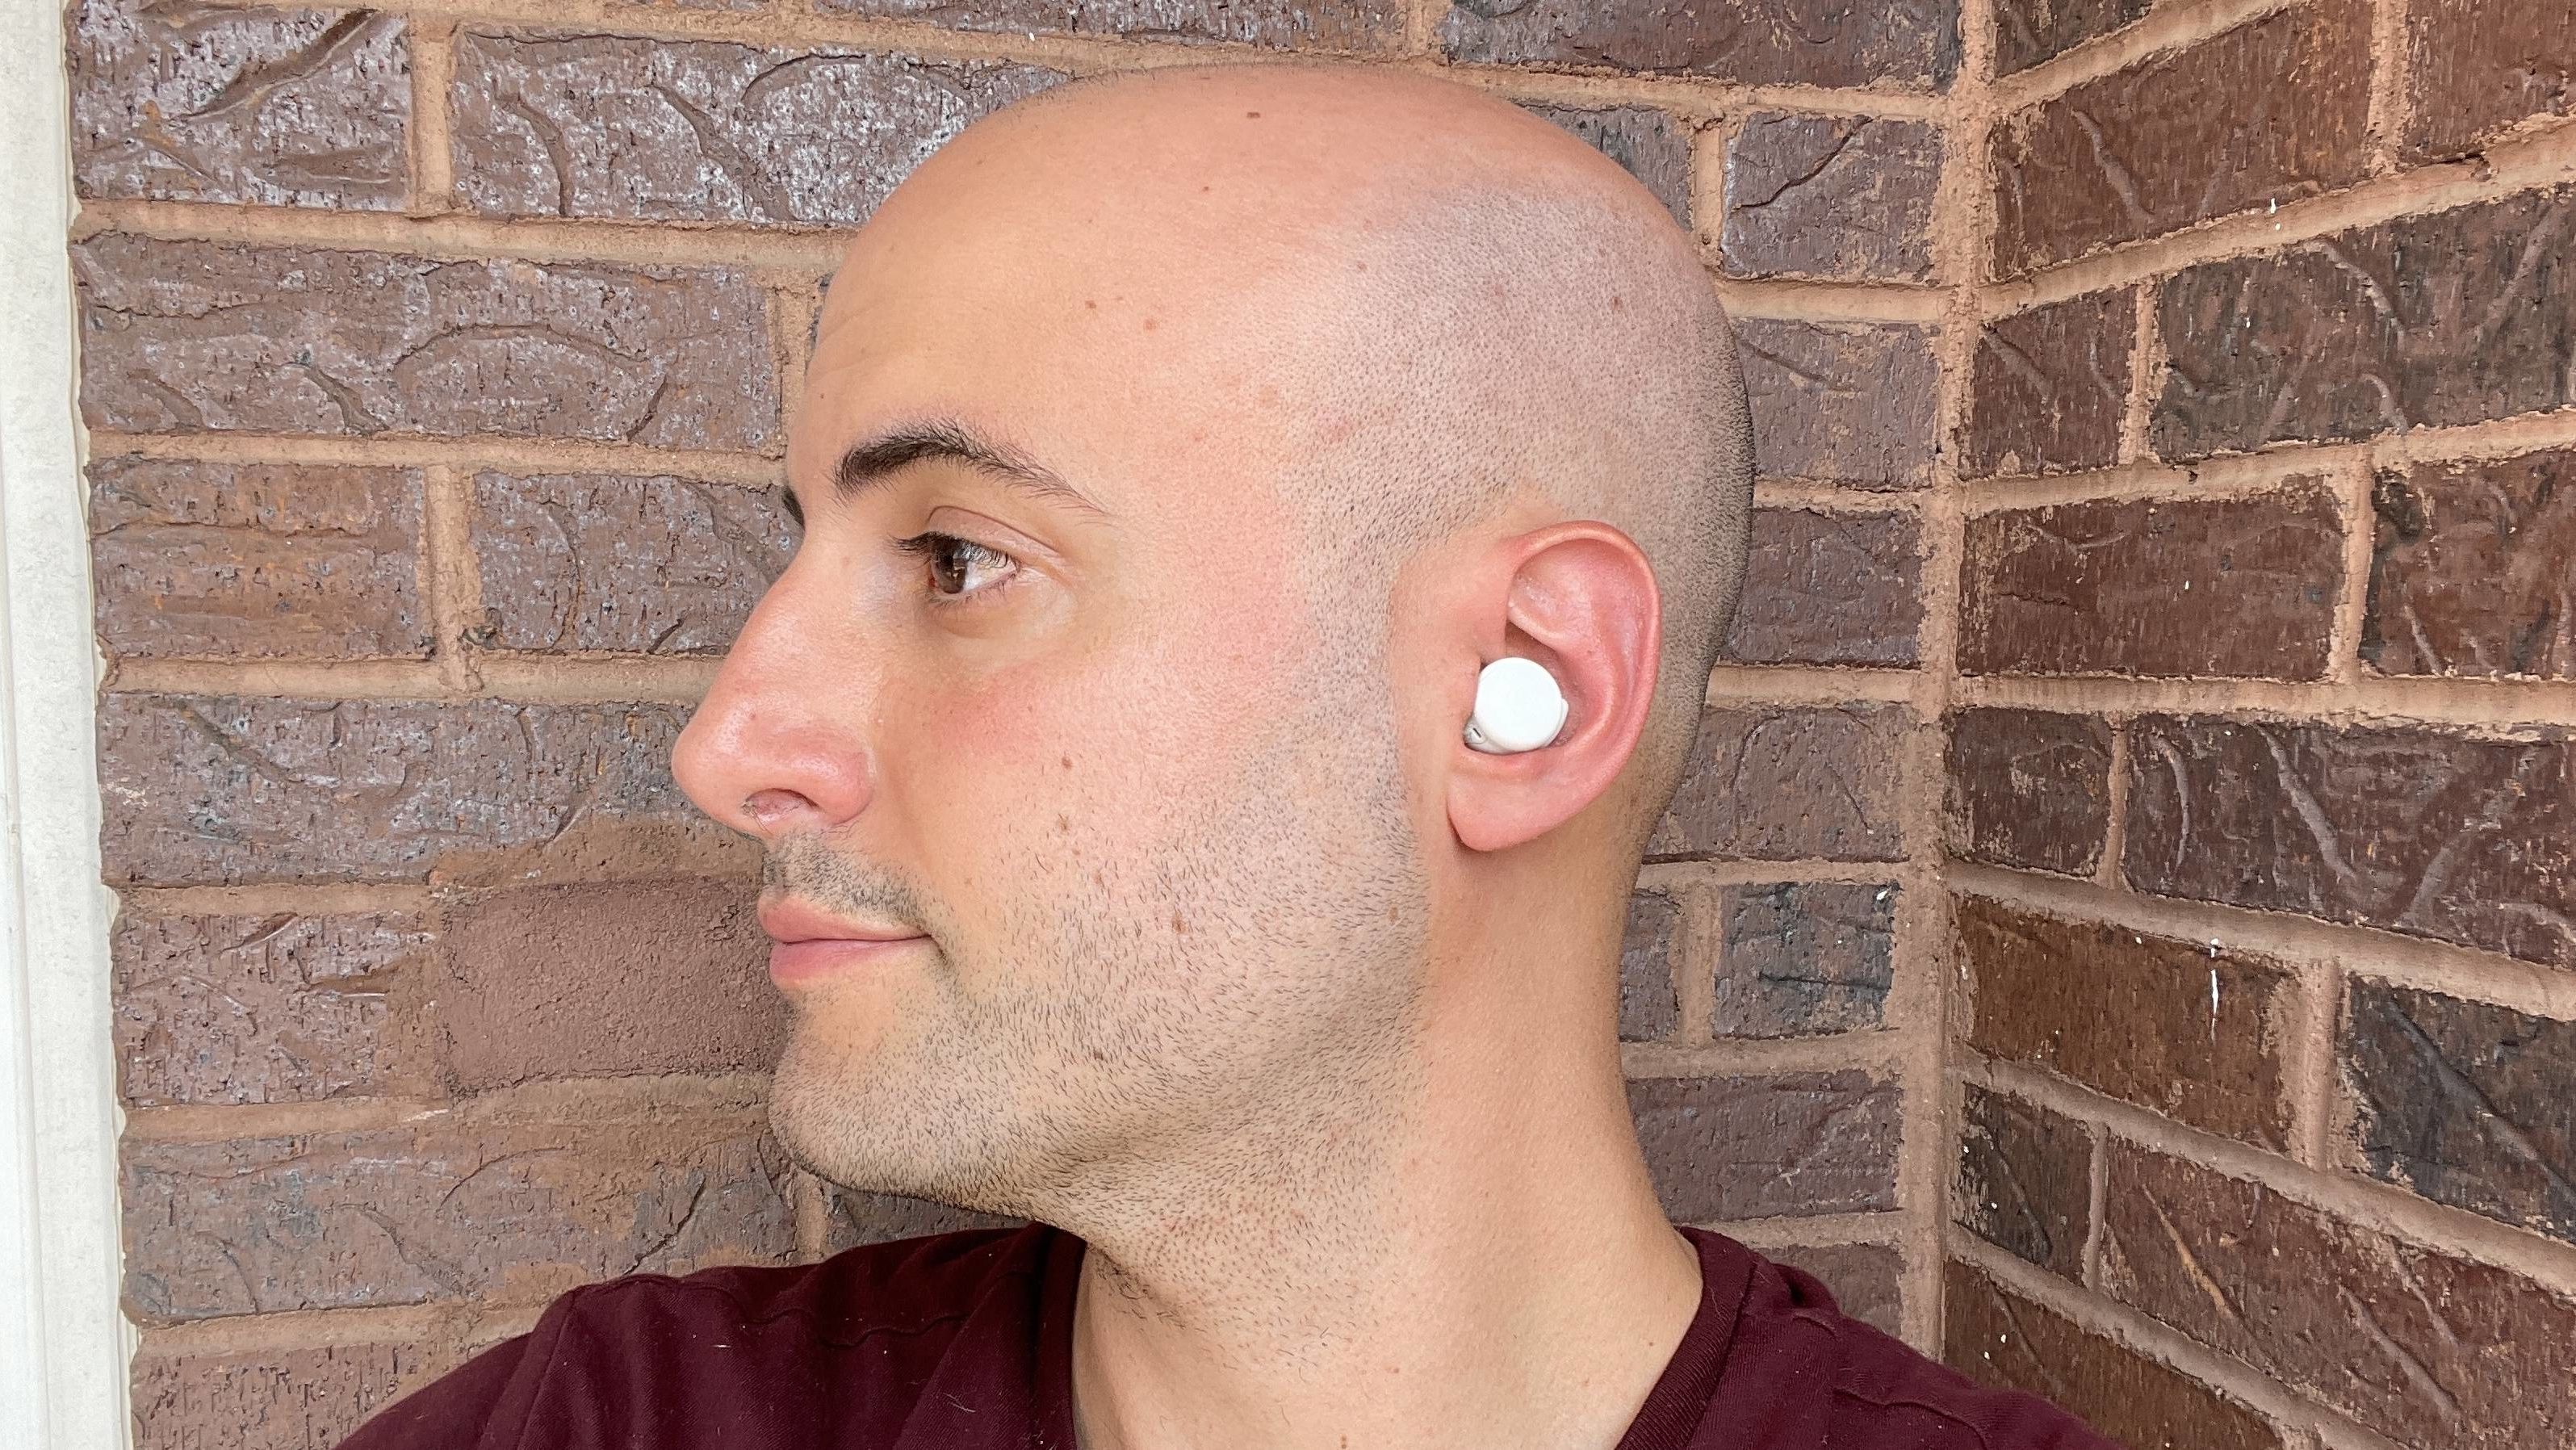 Review: Google's Pixel Buds A-Series are an excellent value at $99